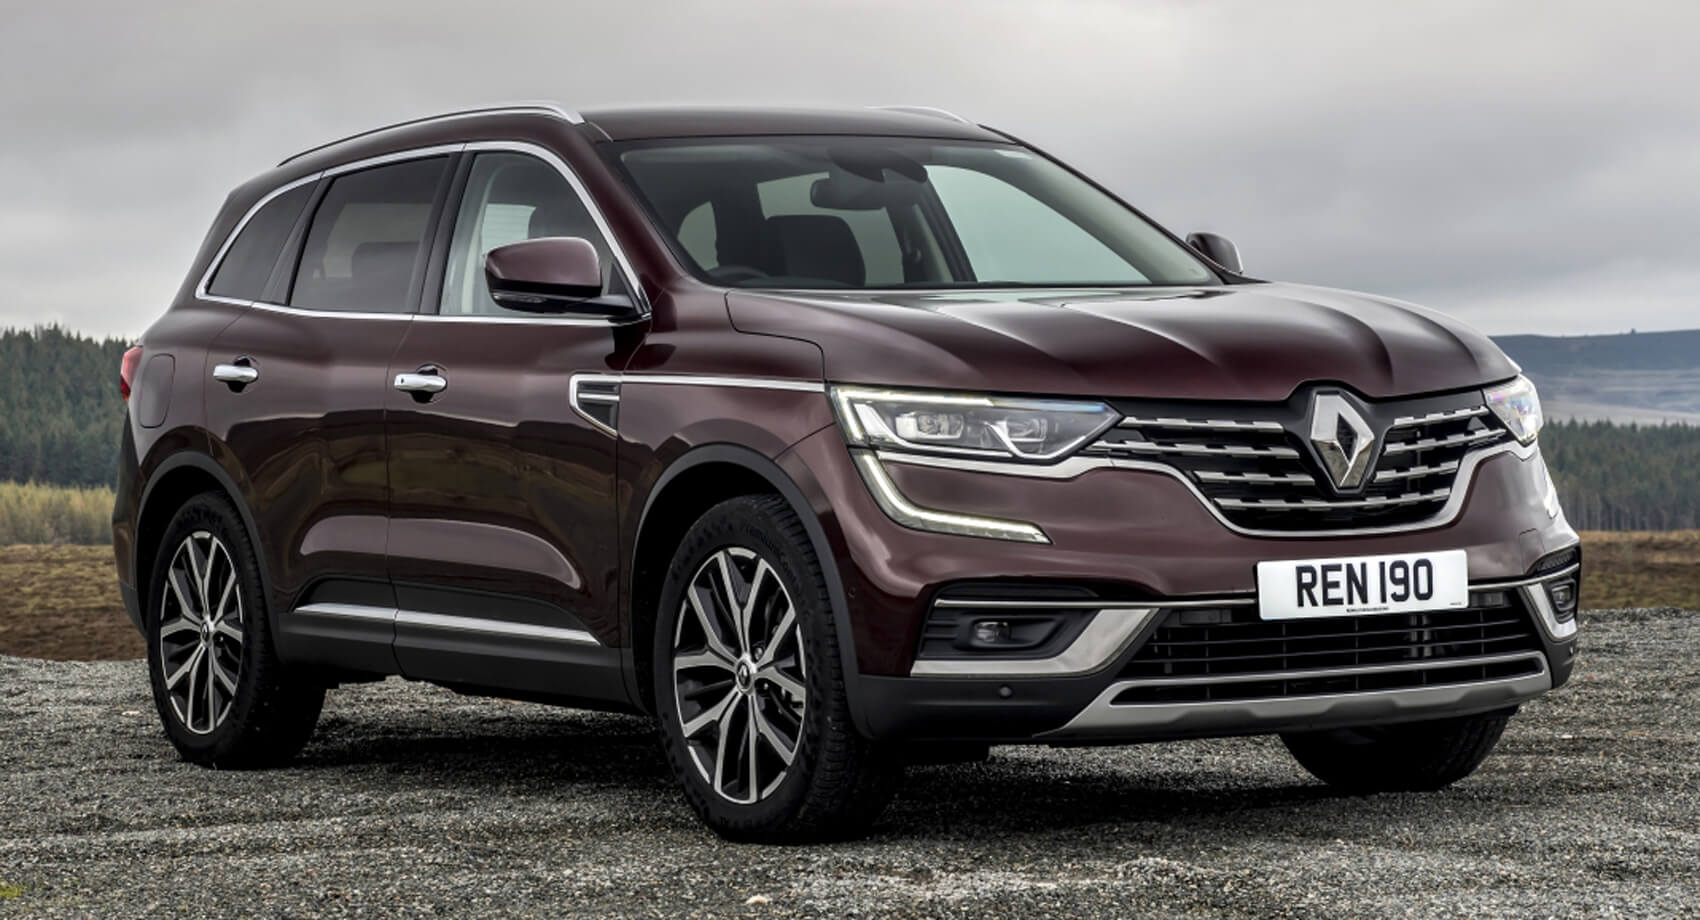 Renault Koleos Midsize SUV Dropped From The UK, Will Other Markets Follow?